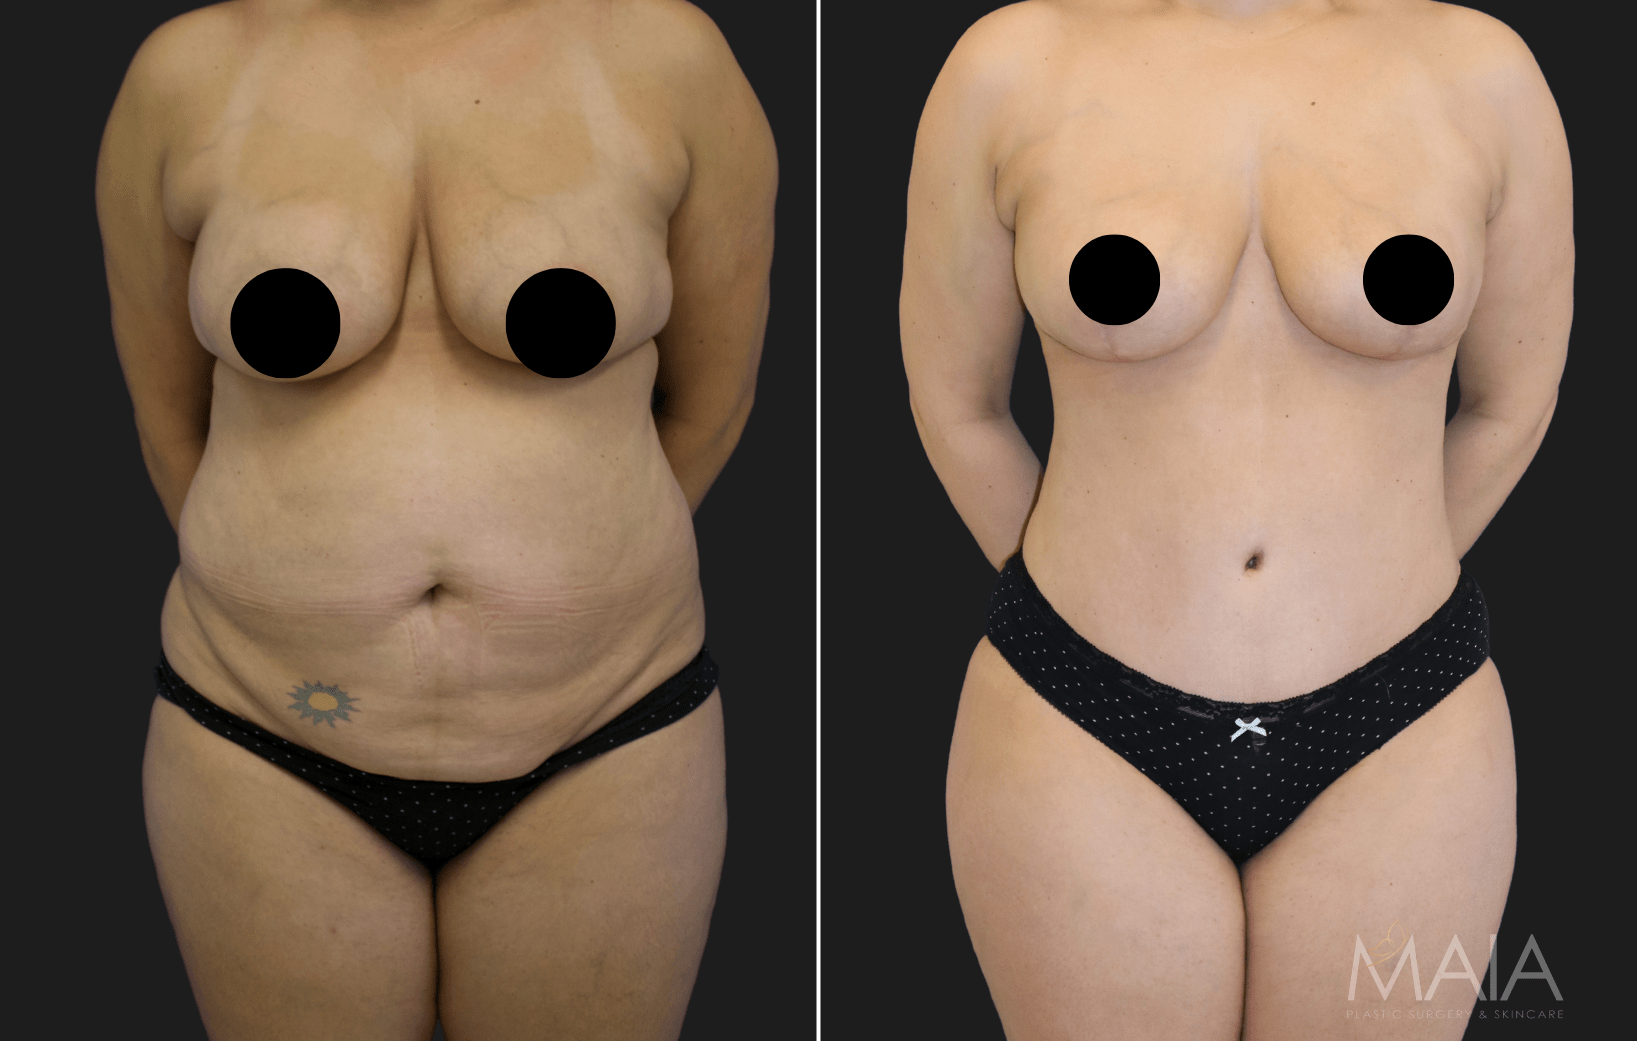 Tummy Tuck & Breast Augmentation Scars 6 Weeks After Surgery